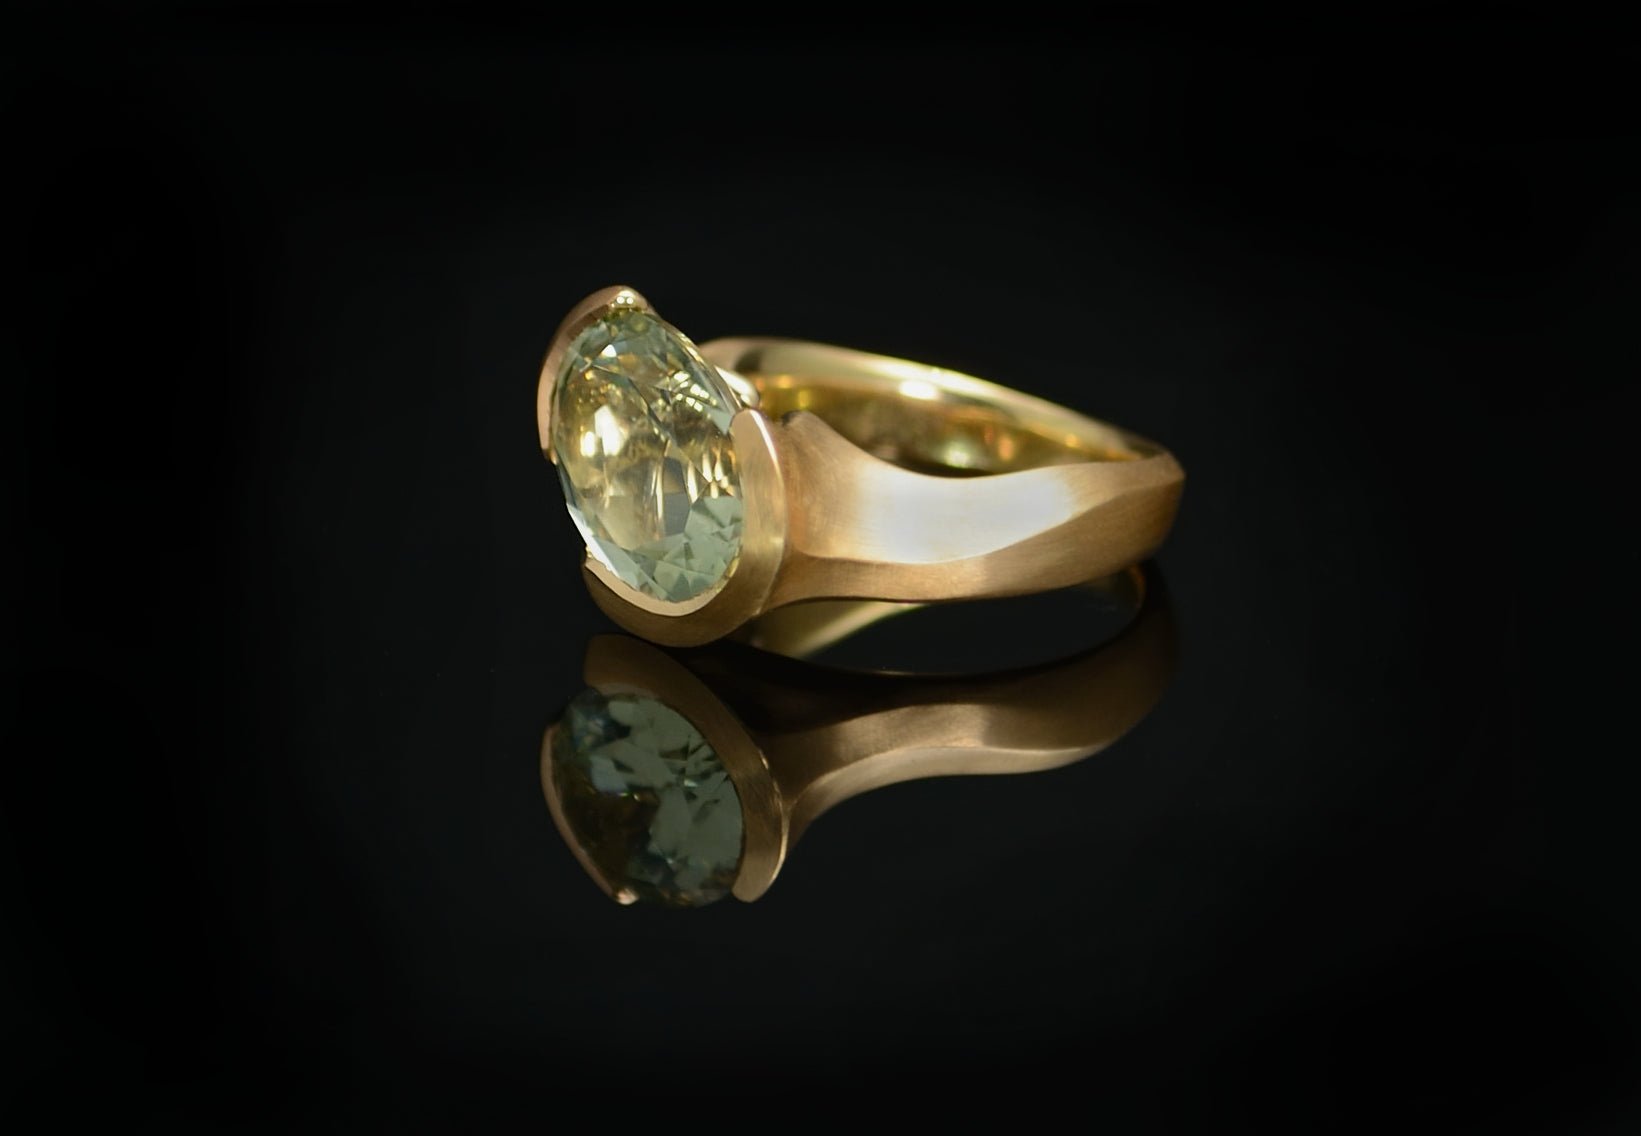 Carved rose gold, diamond and green tourmaline cocktail ring